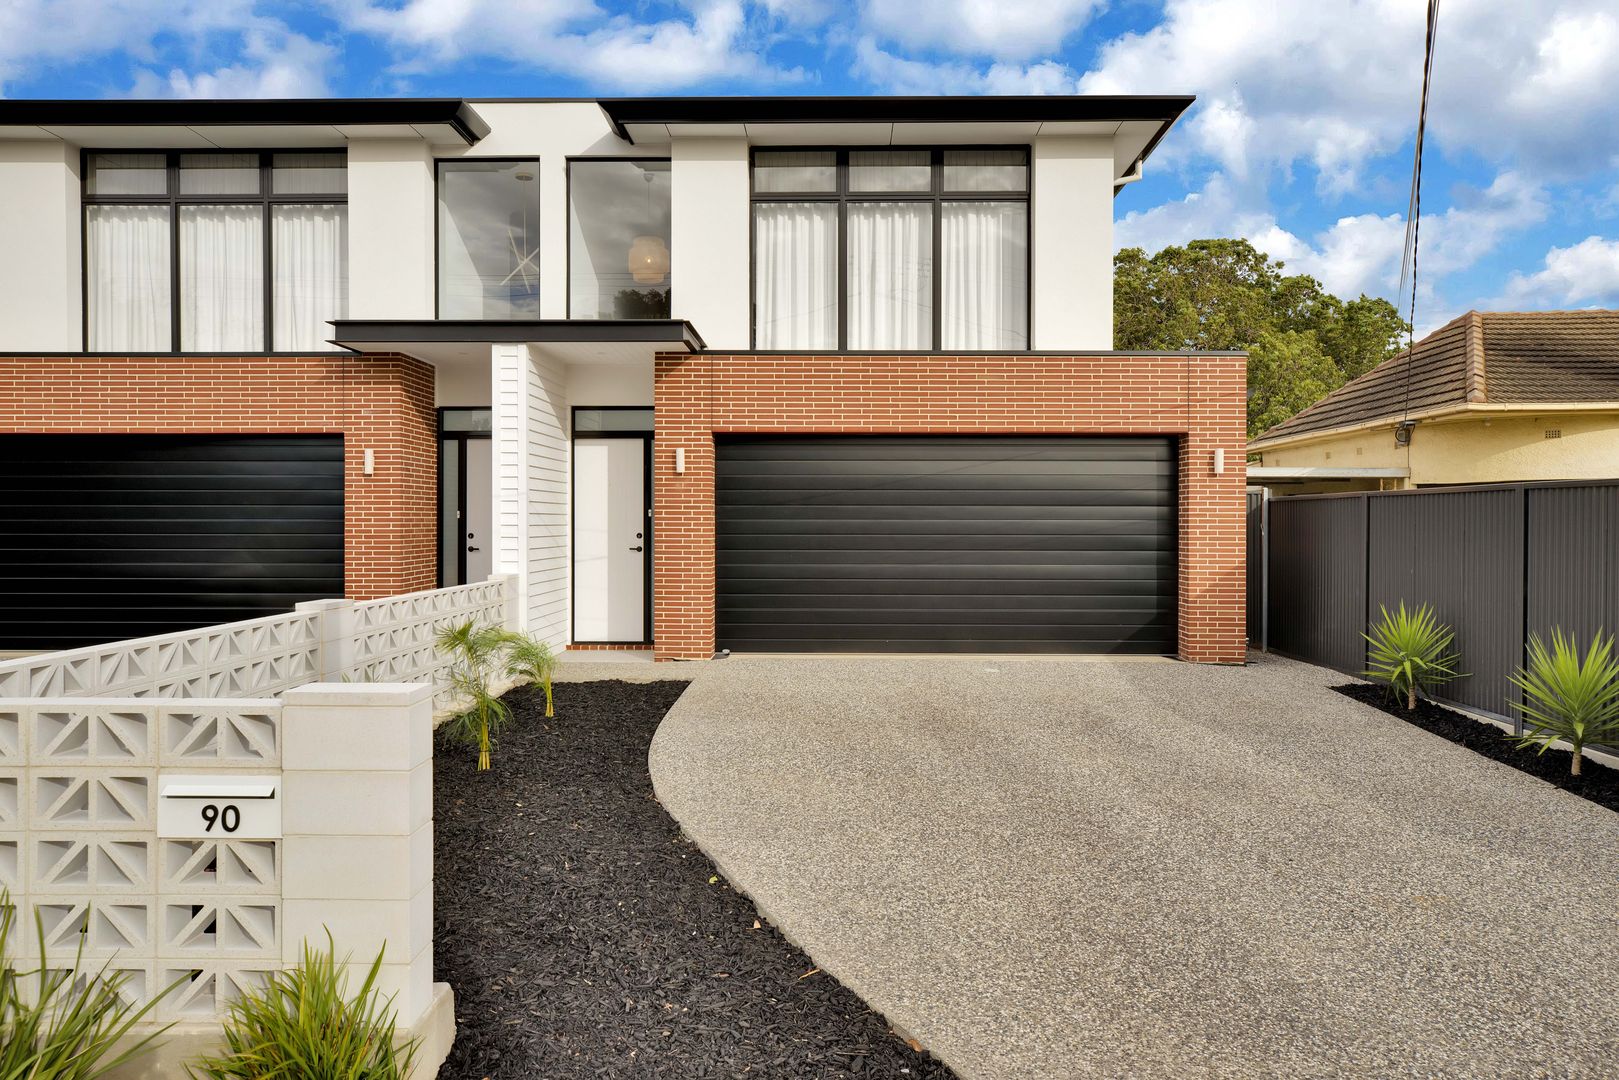 4 bedrooms House in 90 Bells Road GLENGOWRIE SA, 5044